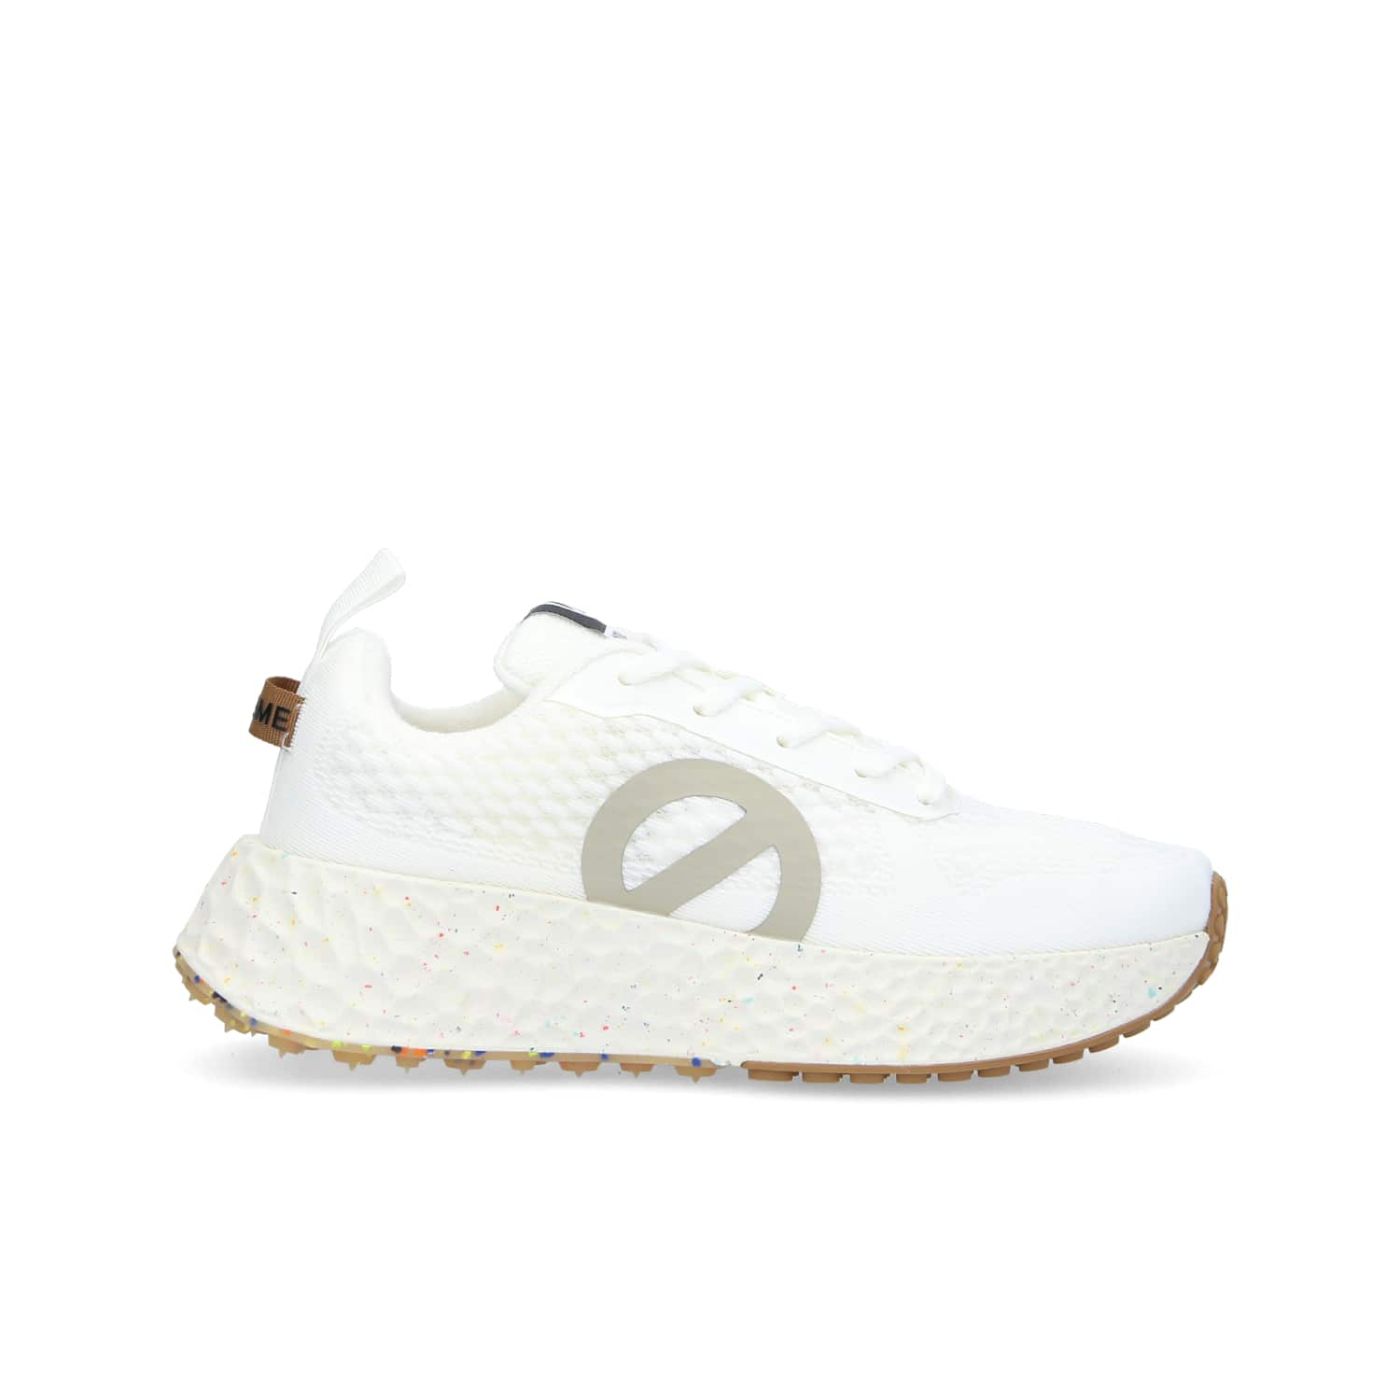 CARTER FLY - MESH RECYCLED - WHITE